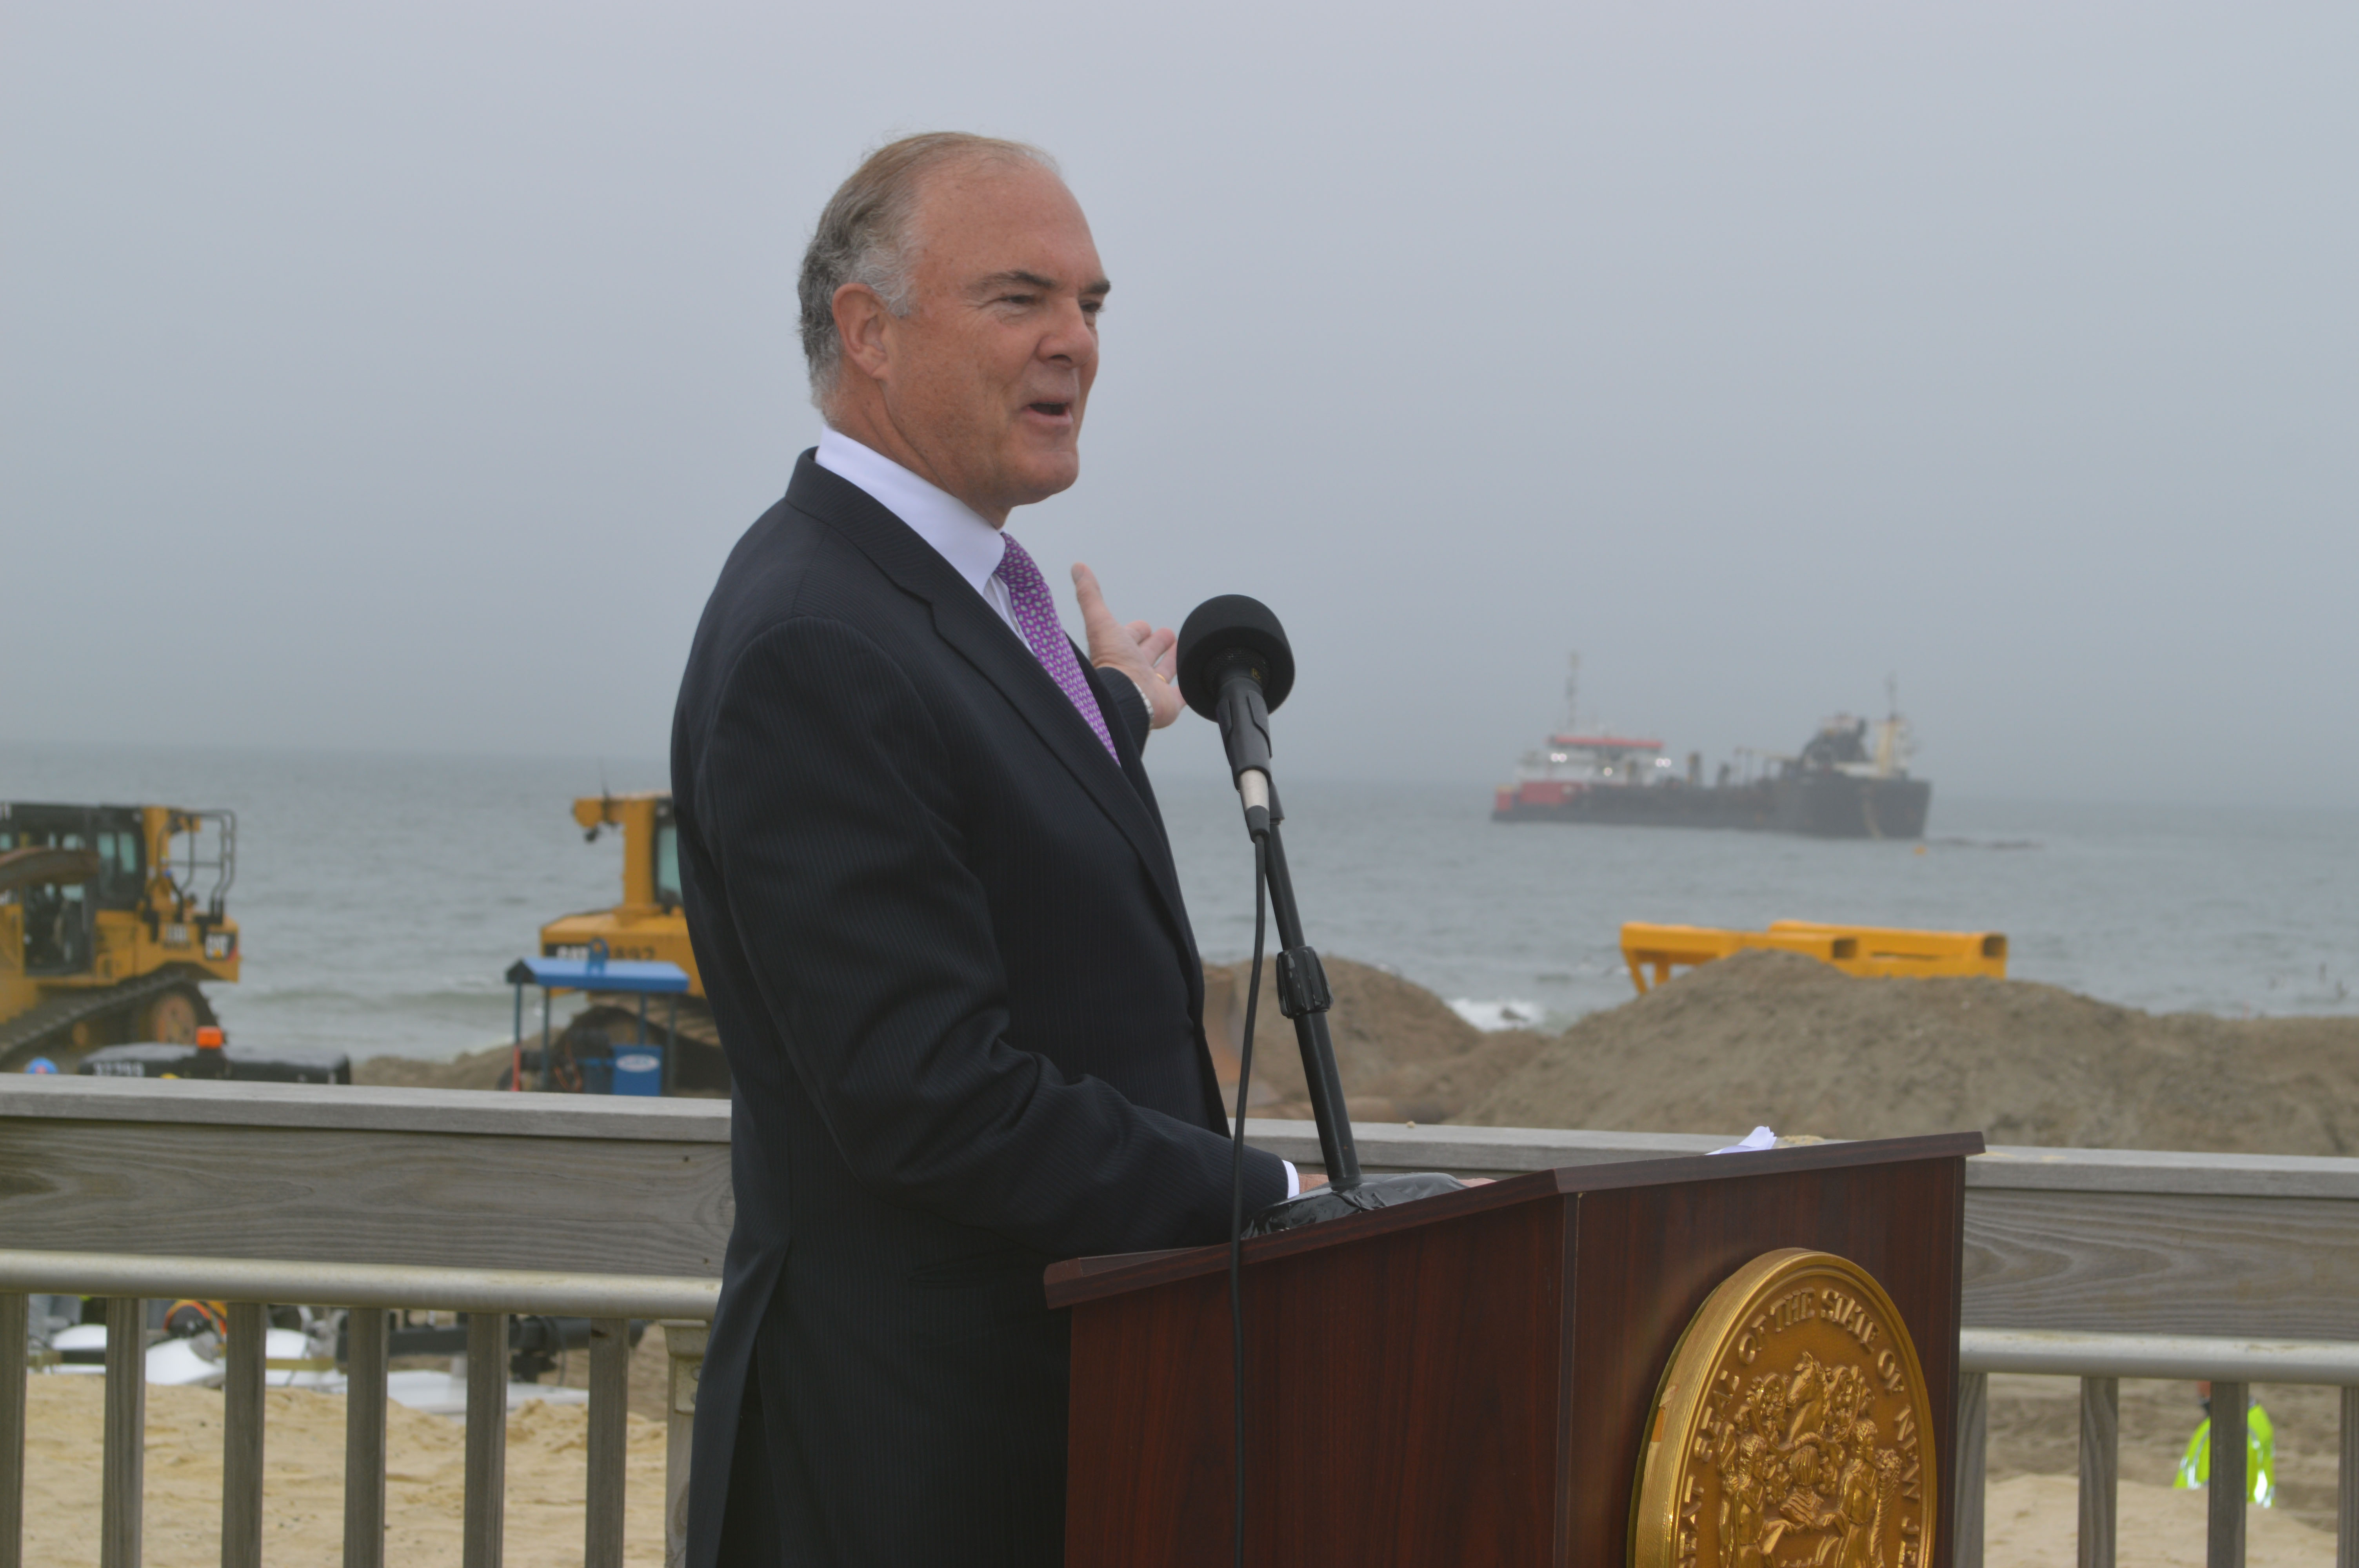 N.J. Department of Environmental Protection Commissioner Bob Martin speaks in Ortley Beach, May 31, 2017. (Photo: Daniel Nee)